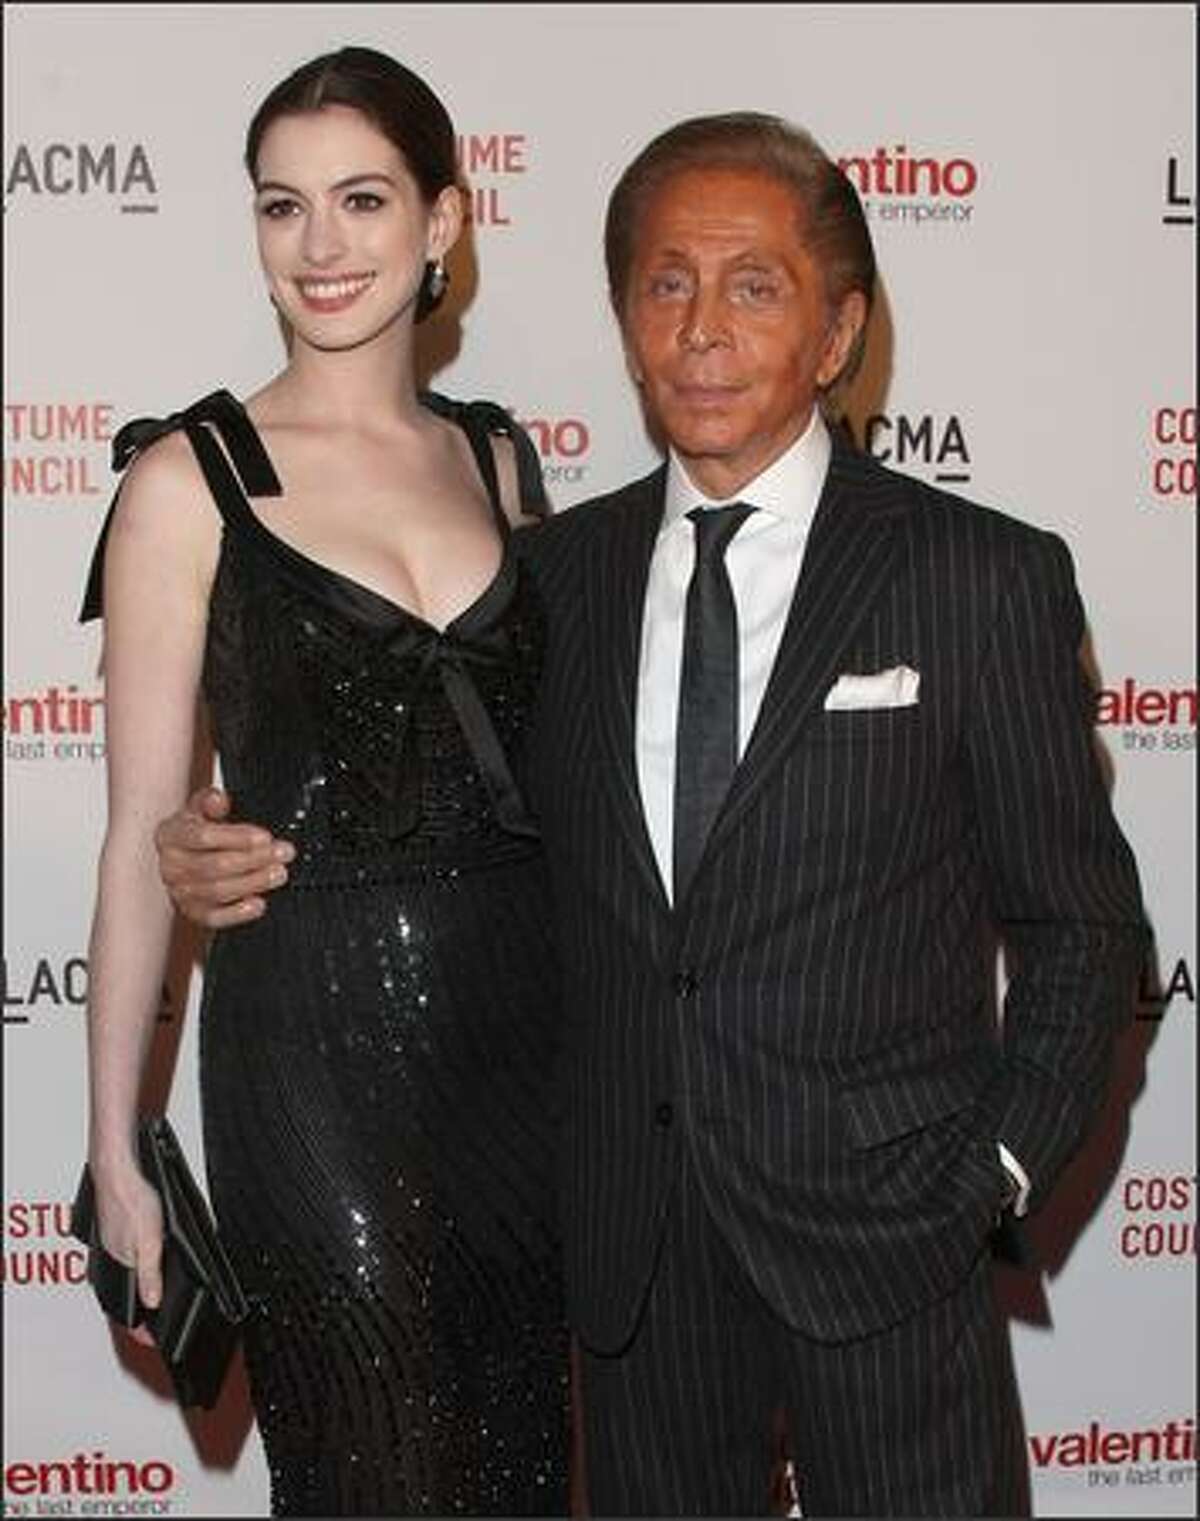 Actress Anne Hathaway and designer Valentino attend the Los Angeles premiere of "Valentino: The Last Emperor" at the Bing Theatre at LACMA in Los Angeles, California.